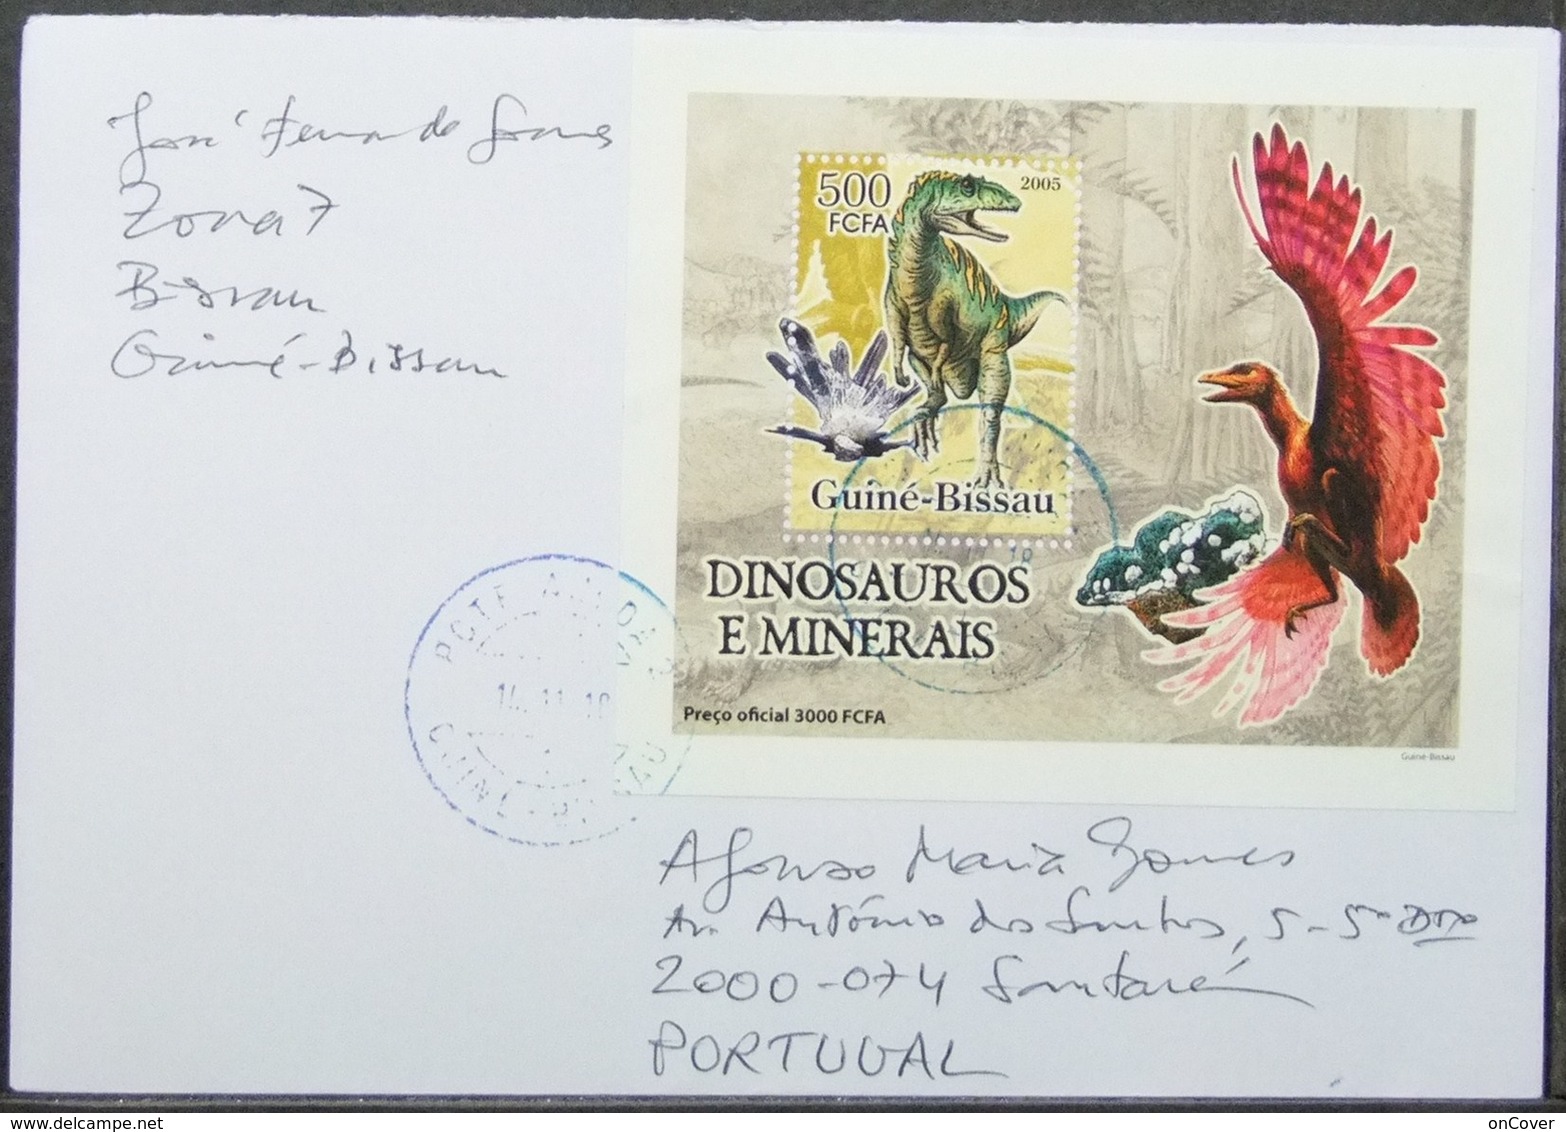 Guine-Bissau - Cover To Portugal Minerals Dinosaur Proof Perforate & Imperforate - Preistorici